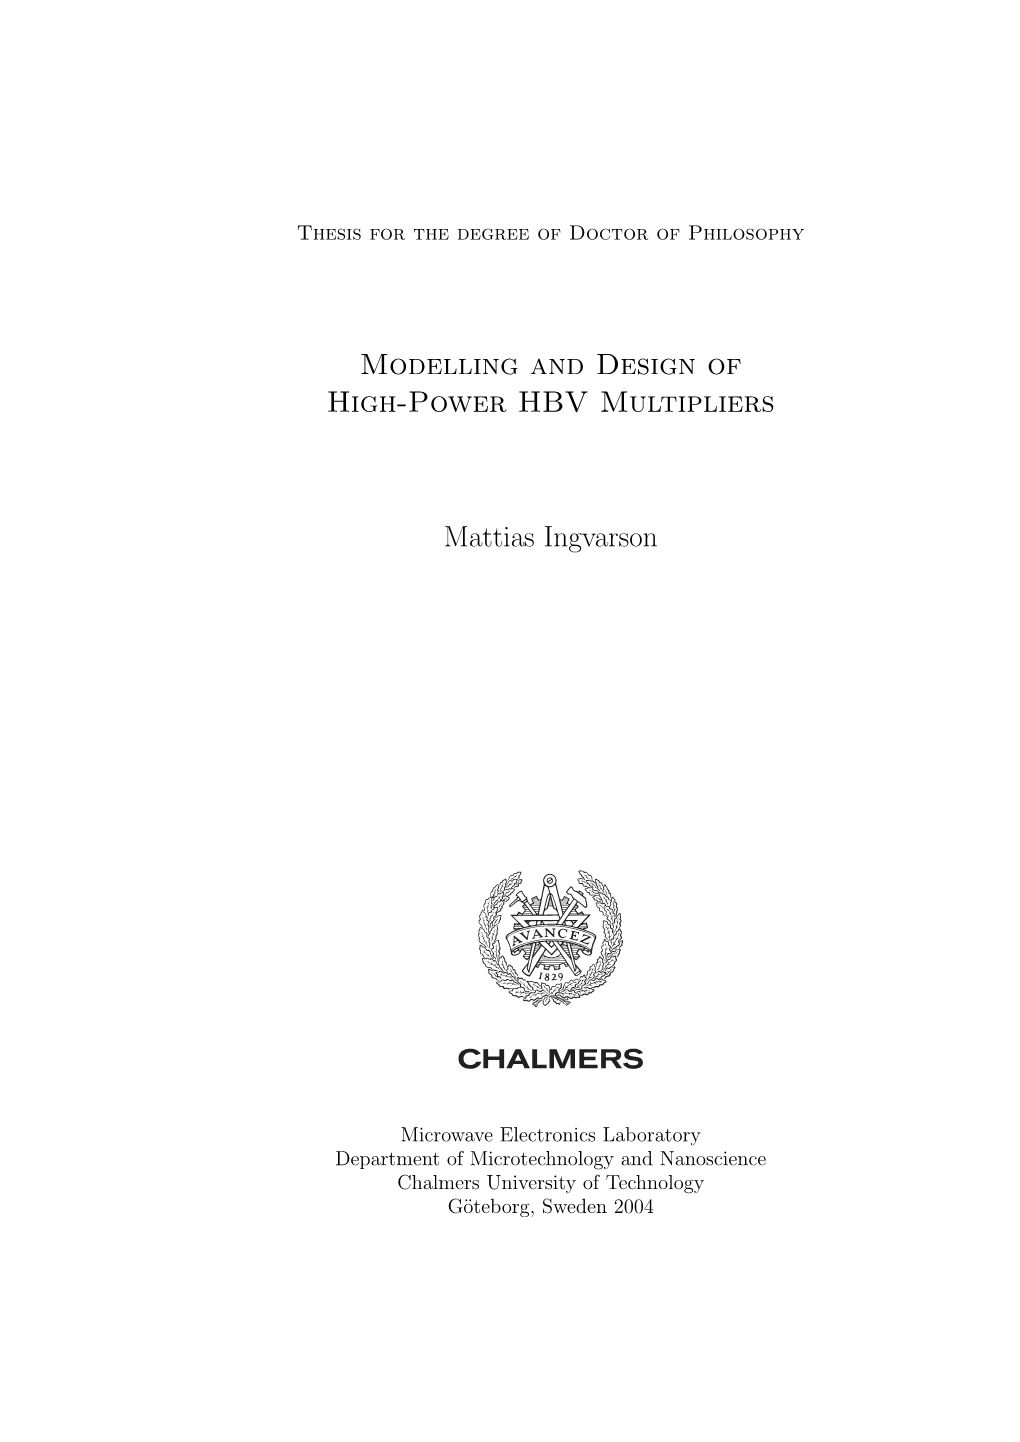 Modelling and Design of High-Power HBV Multipliers